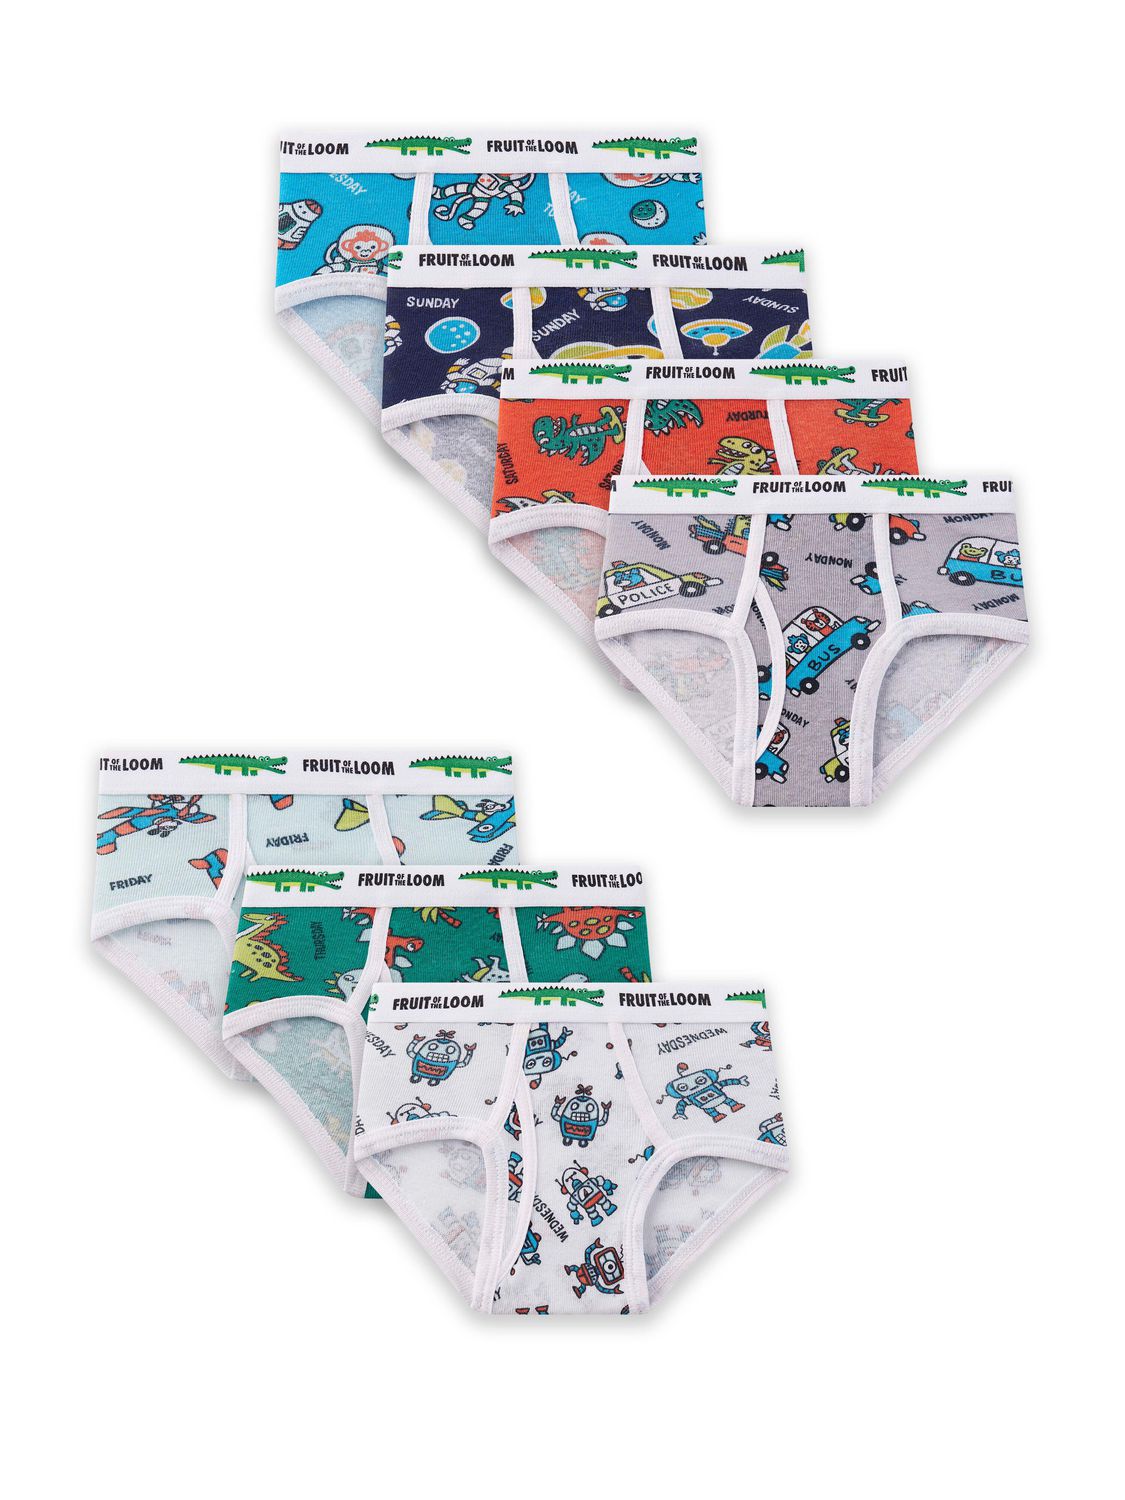  Fruit of the Loom Toddler Boys Days of the Week Briefs Underwear  (7 Pair Pack), 4T/5T, Multi: Clothing, Shoes & Jewelry